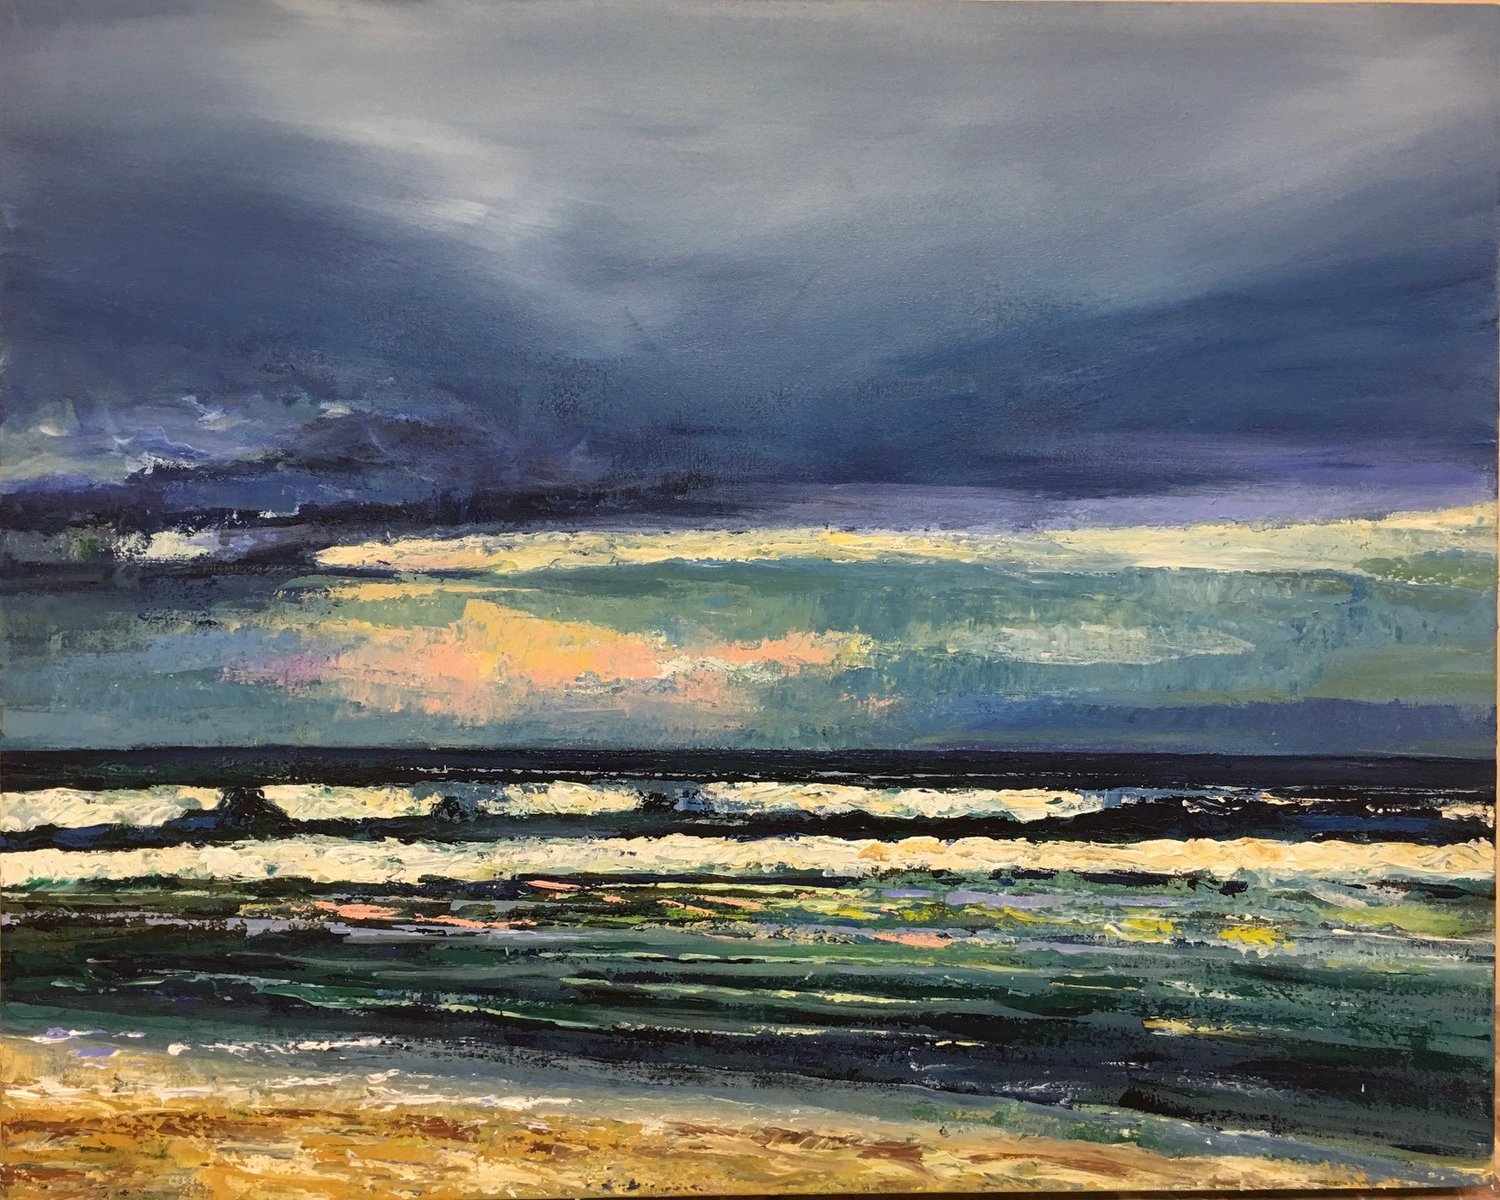 Charlotte Chastain enjoys painting landscapes, seascapes and flowers.